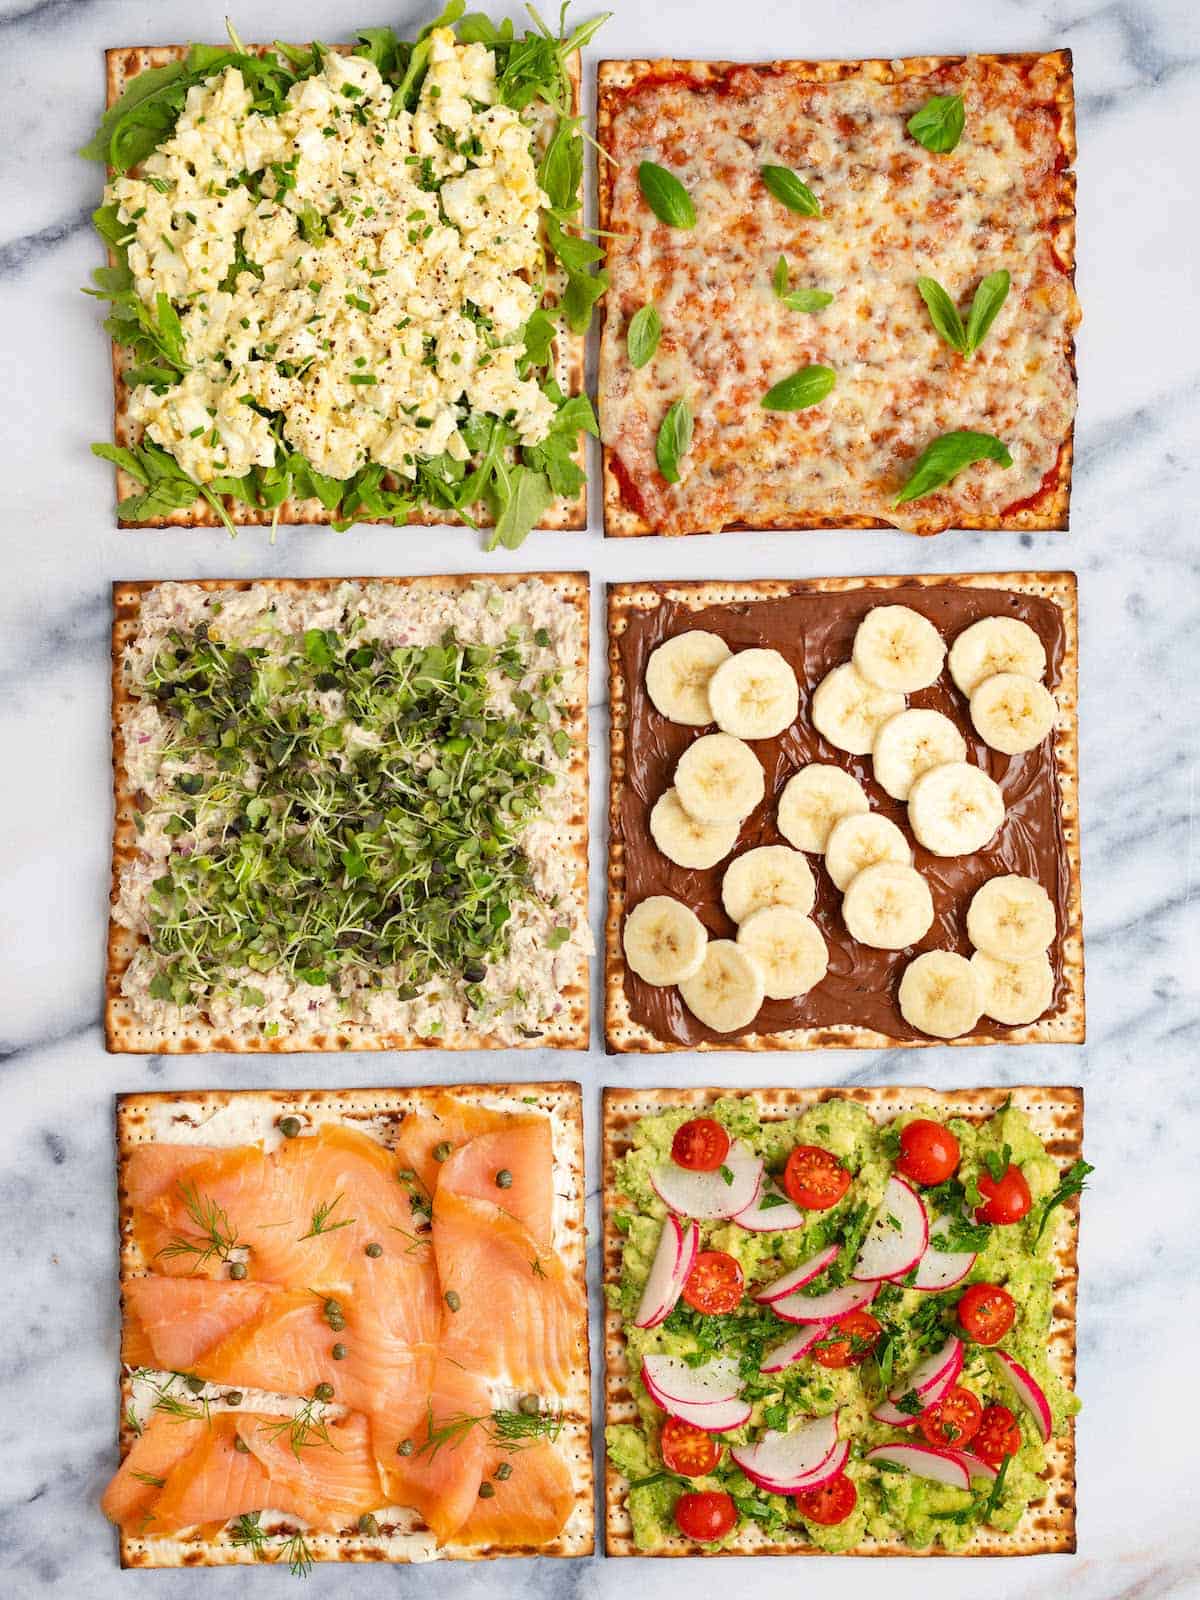 6 sheets of matzo with different toppings including avocado, egg salad, tuna salad, lox, pizza, and hazelnut spread.